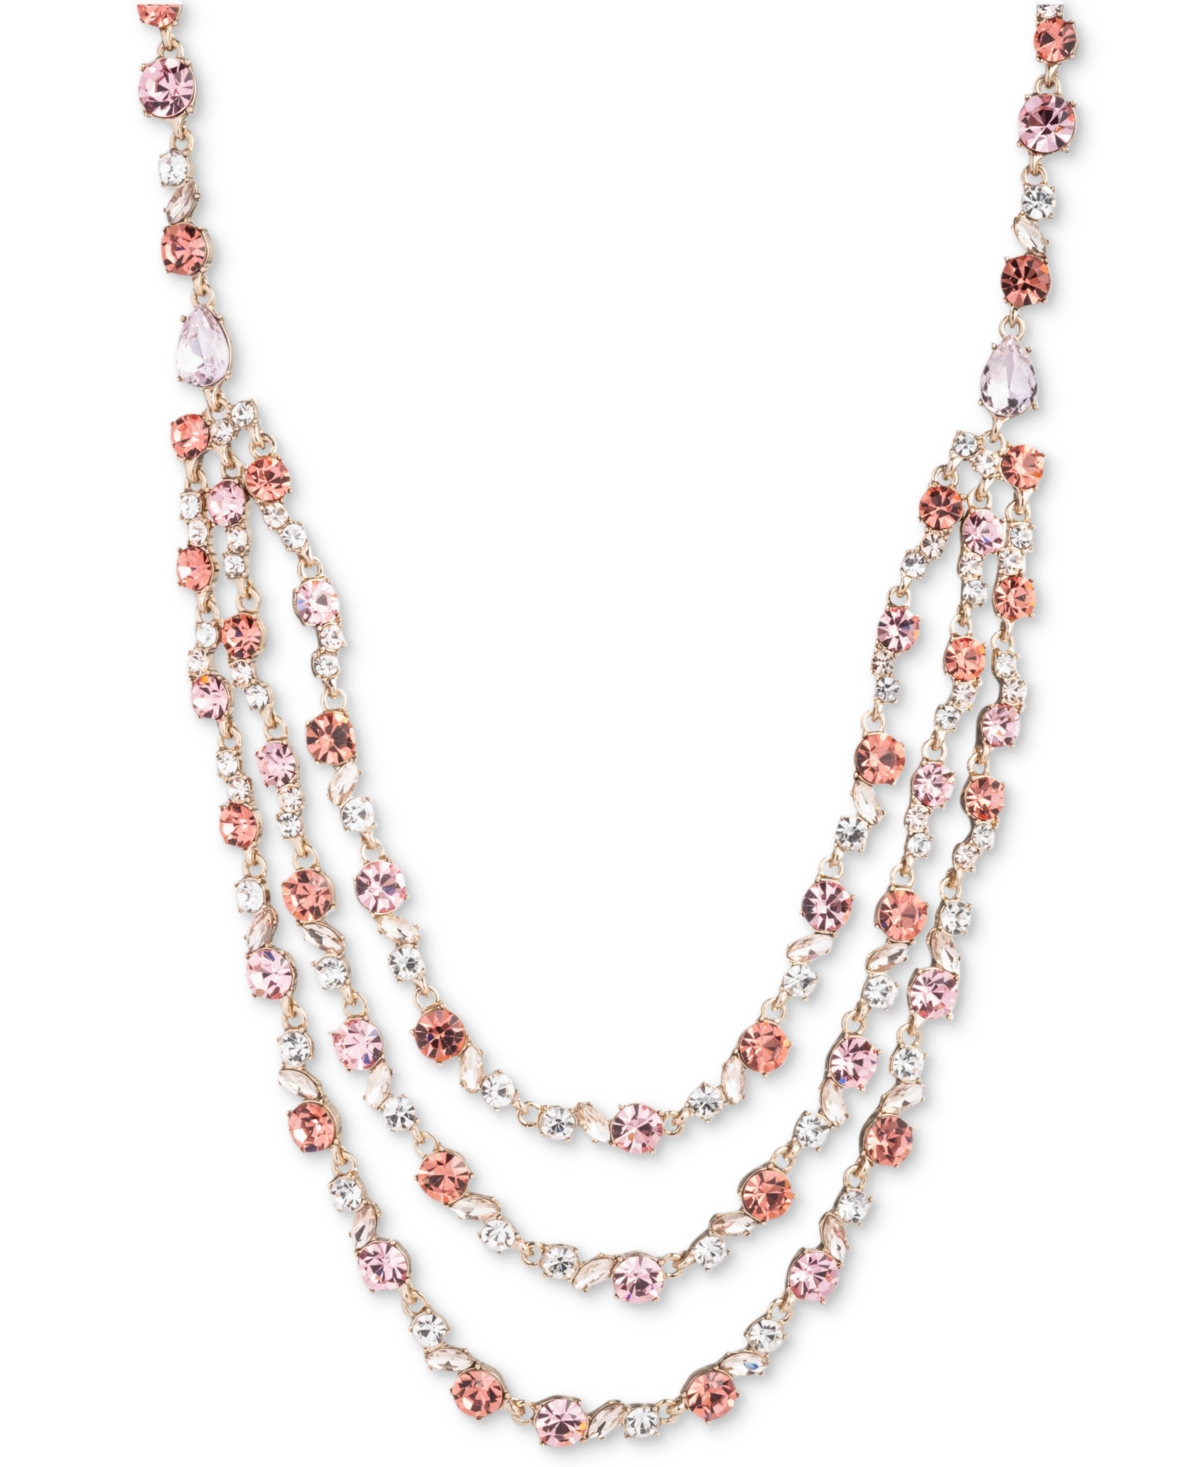 Givenchy Gold-tone Rose Crystal Multi Row Necklace, 16" + 3" Extender